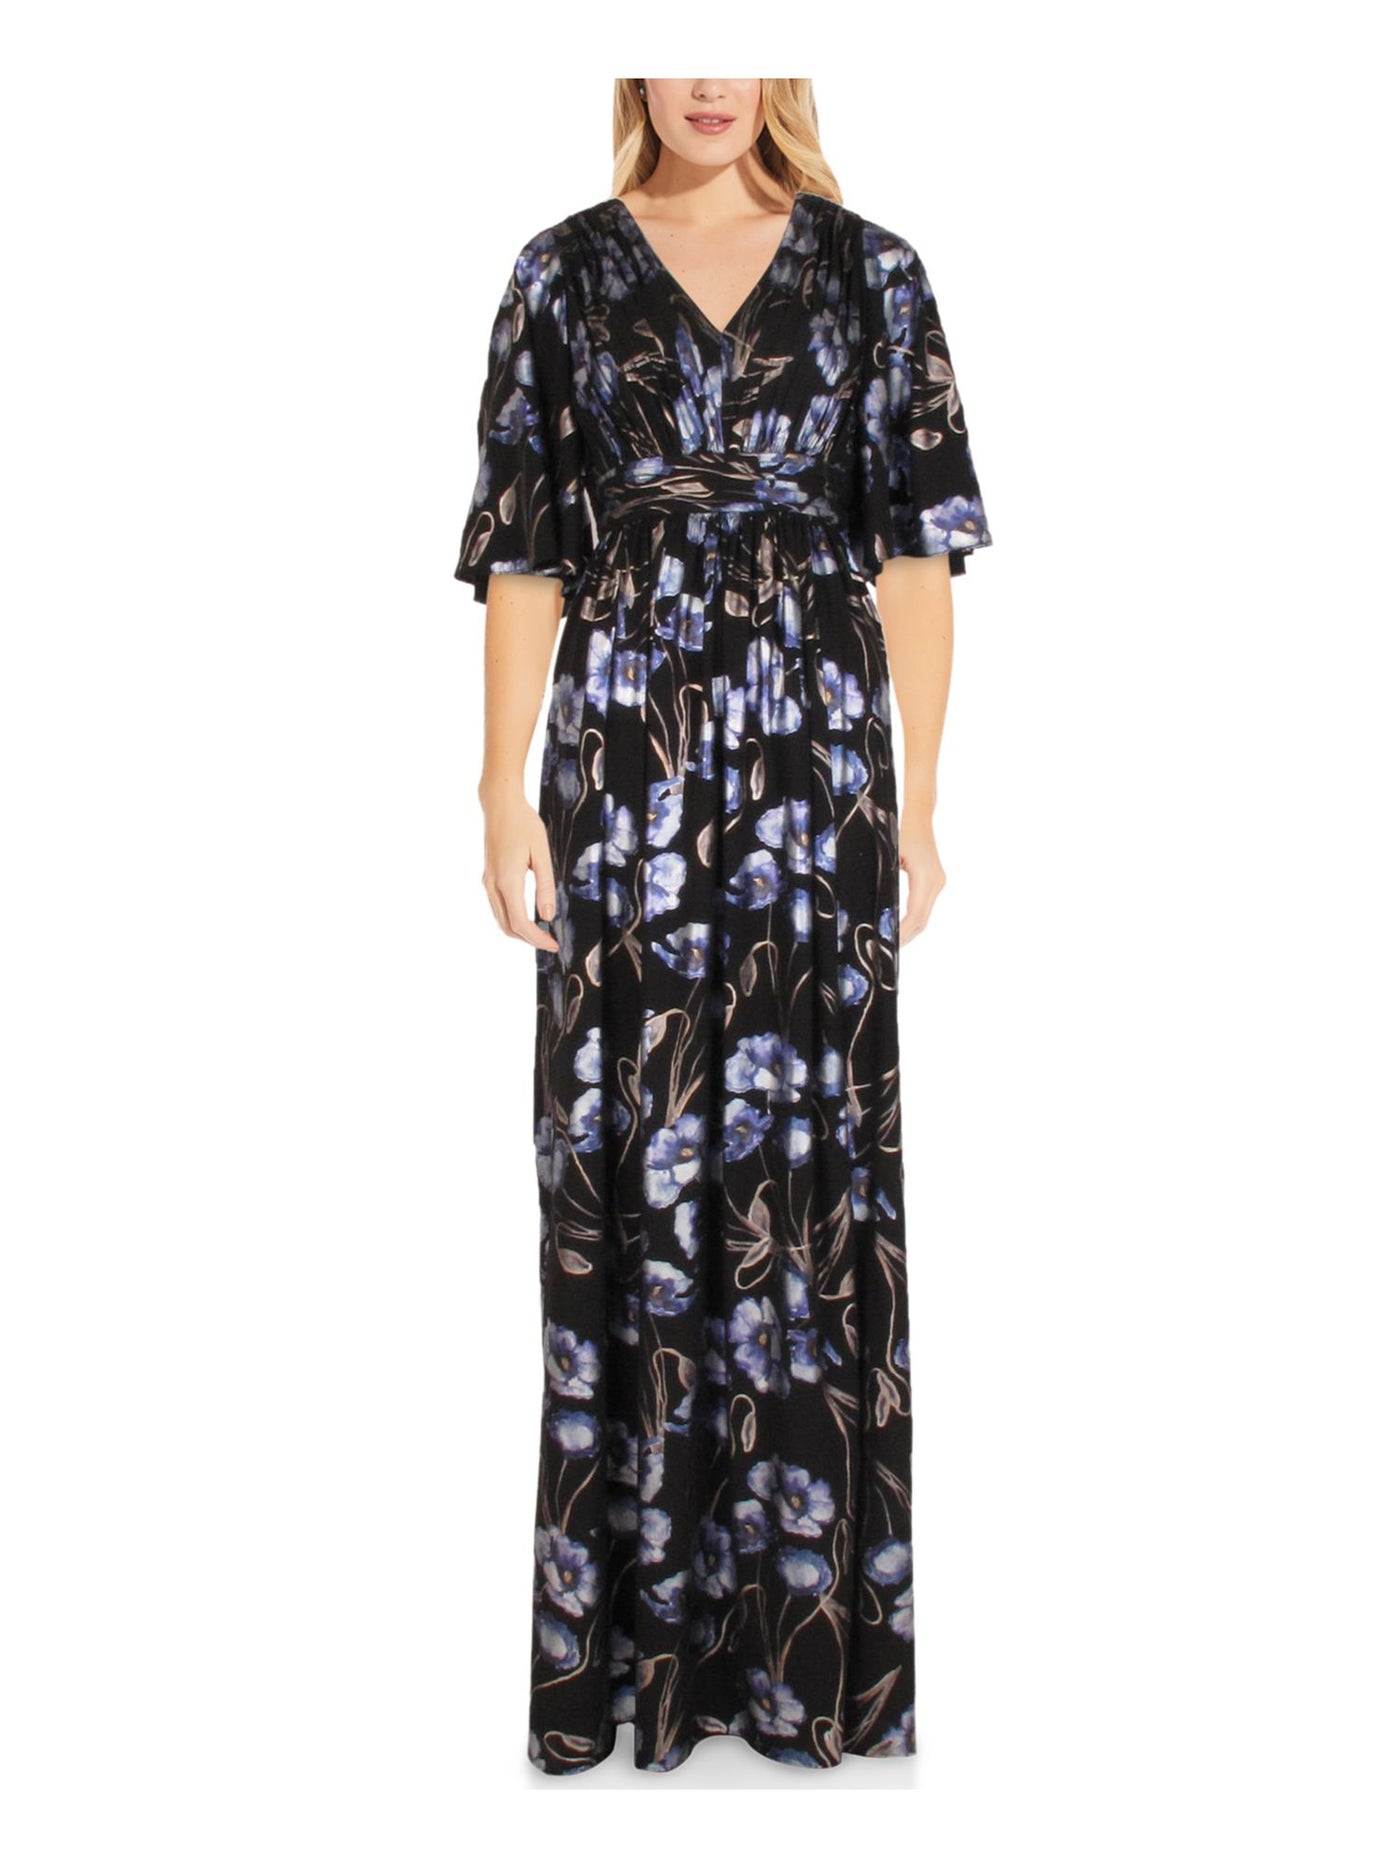 ADRIANNA PAPELL Womens Blue Pleated Zippered Metallic Floral Kimono Sleeve V Neck Full-Length Evening Gown Dress 6